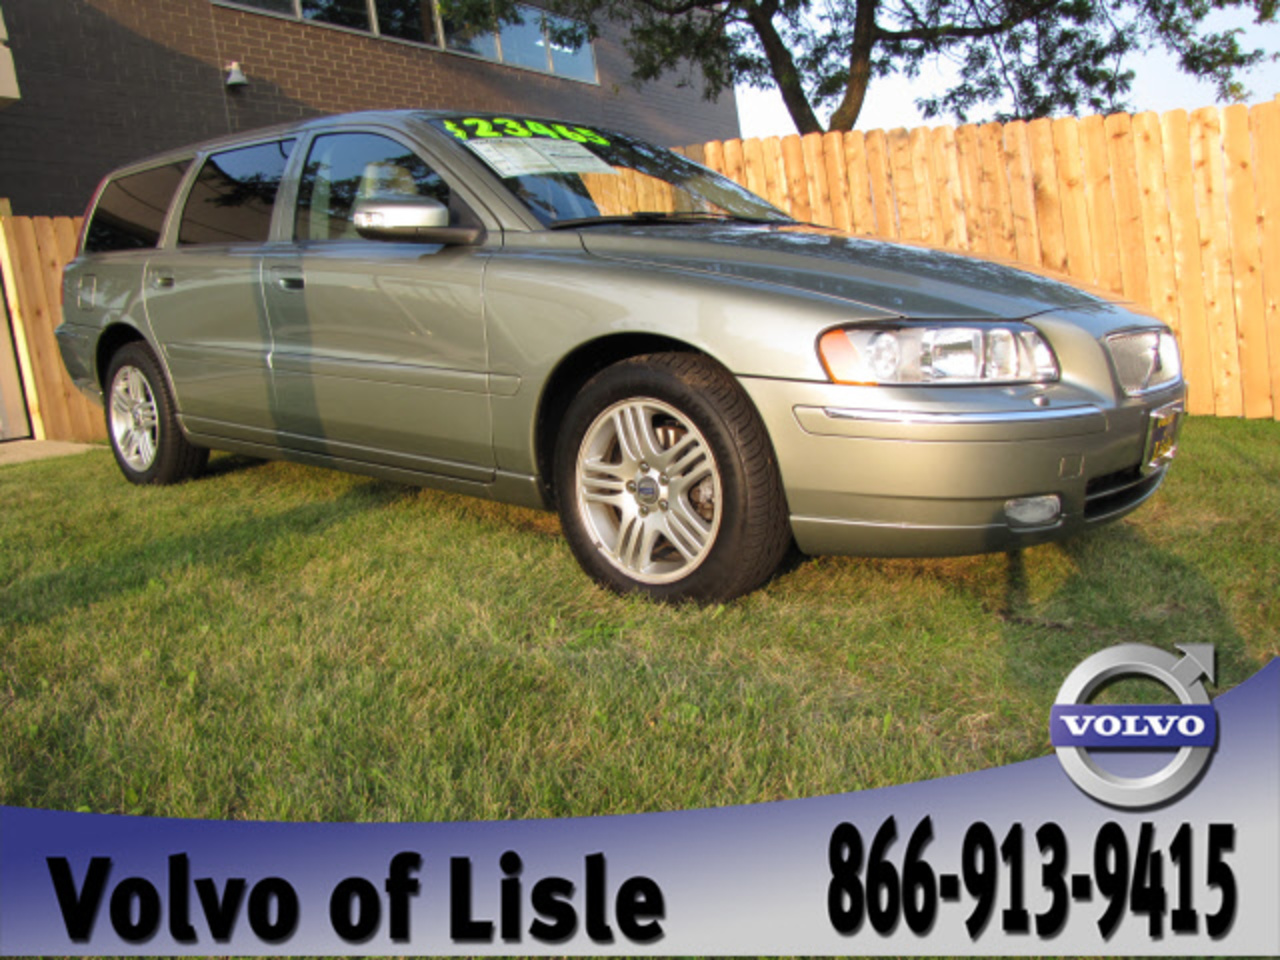 Volvo V70 24 T. View Download Wallpaper. 640x480. Comments